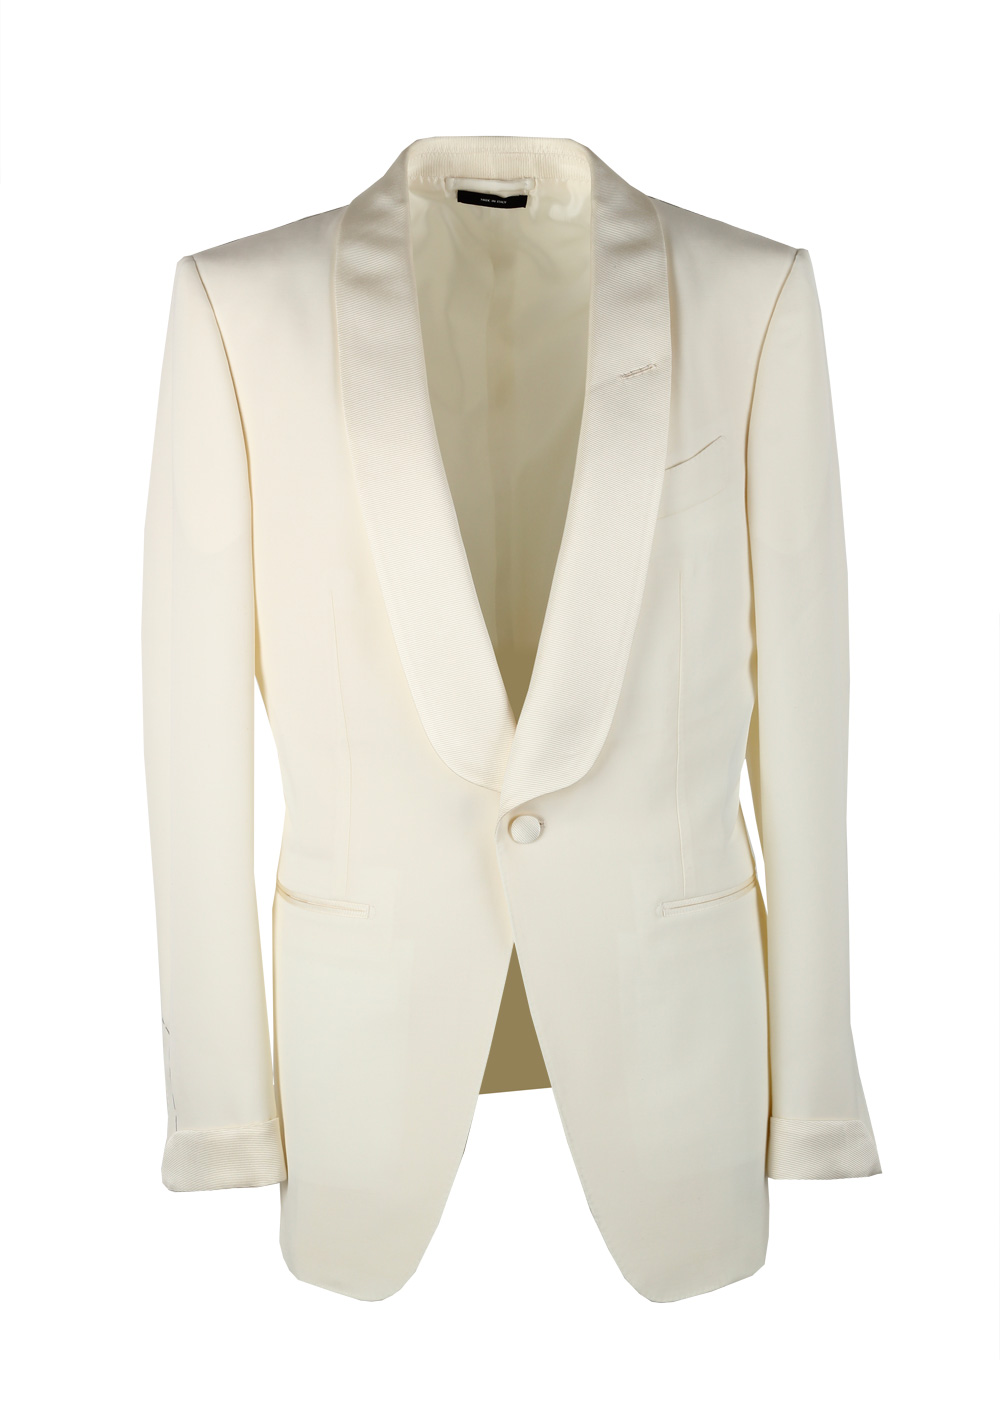 TOM FORD O’Connor Ivory Tuxedo Dinner Jacket Size 48 / 38R U.S. Fit Y ...